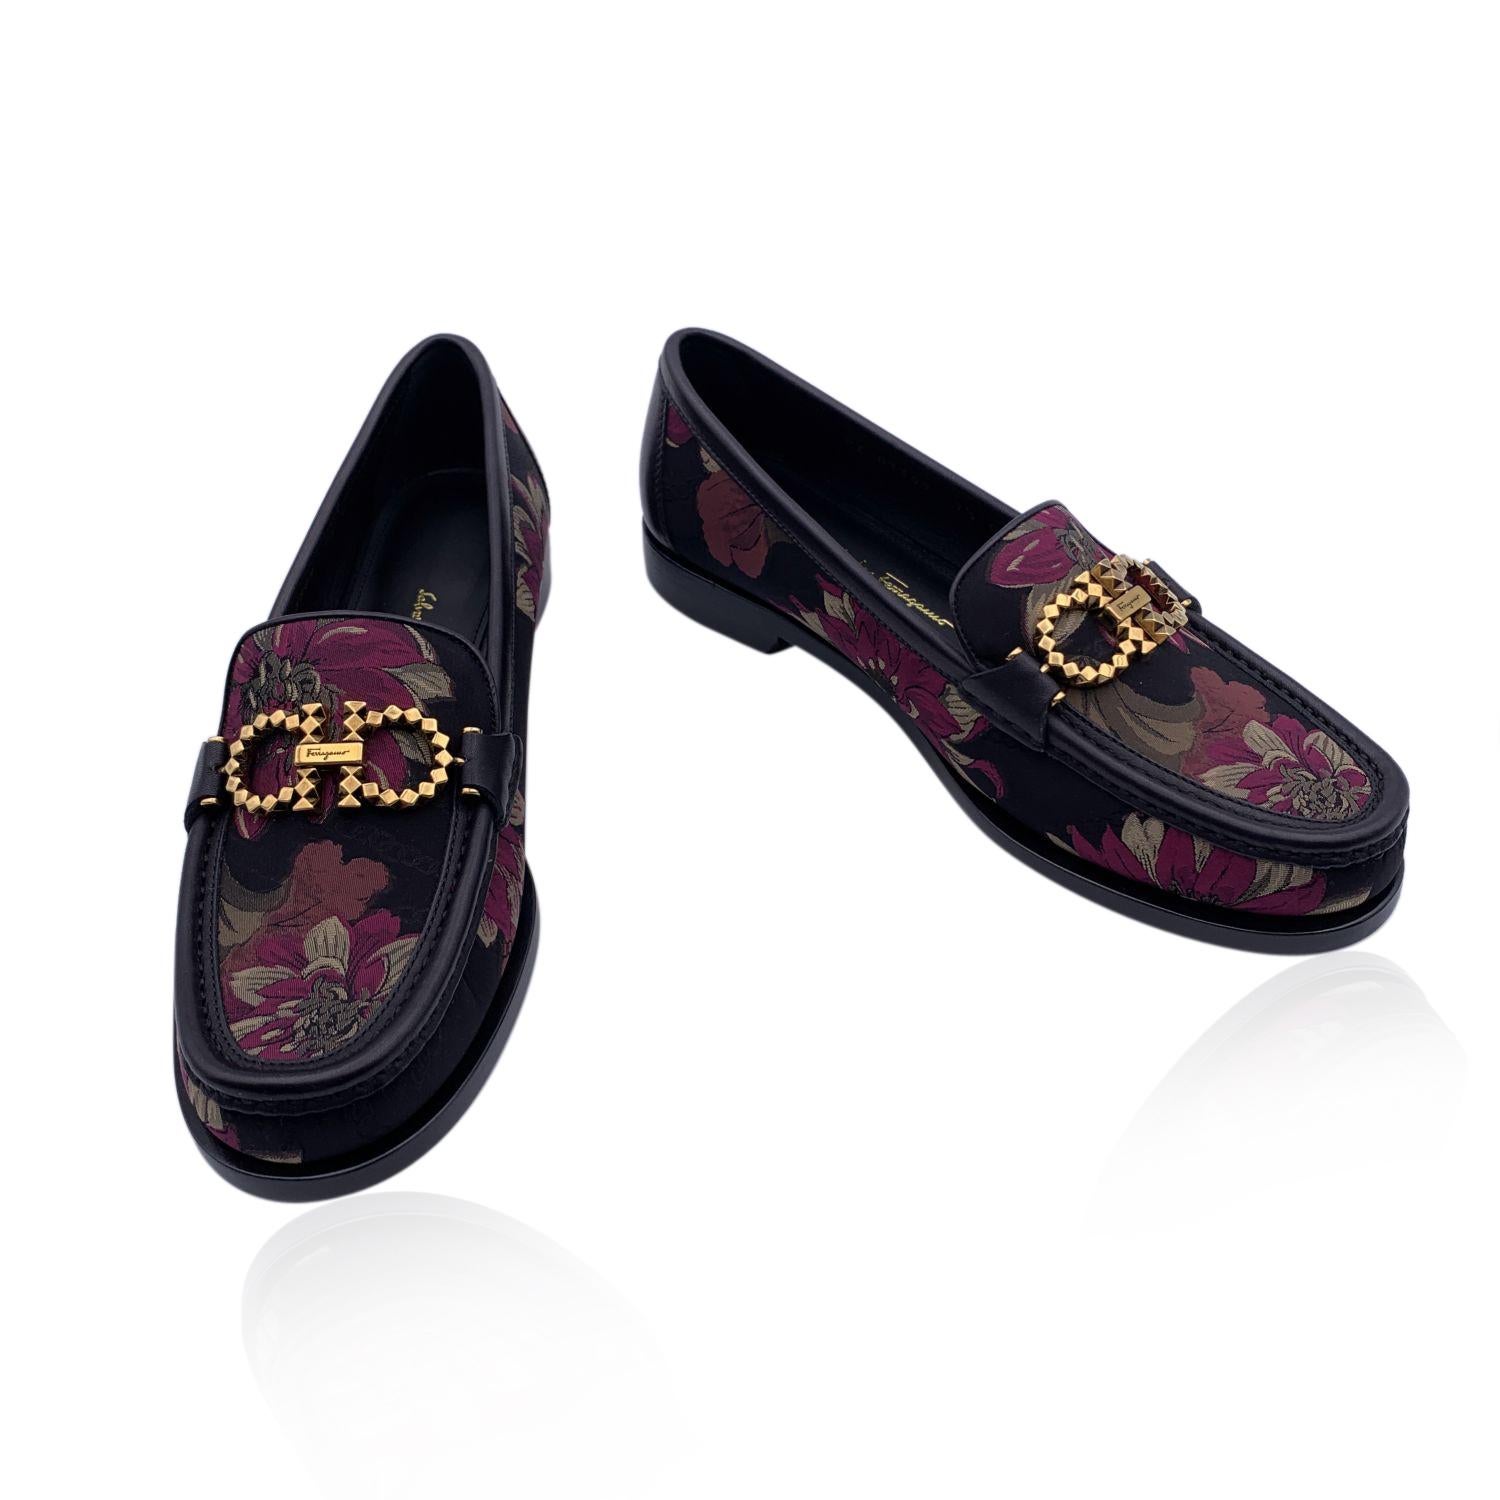 Beautiful Salvatore Ferragamo 'Rolo T' Moccassins Loafers Shoes. Crafted in leather with floral fabric upper. They feature a round toe, gold metal Gancini detailing on the toes and slip-on design. Leather sole. Padded insole. Heels height: 1cm. Made